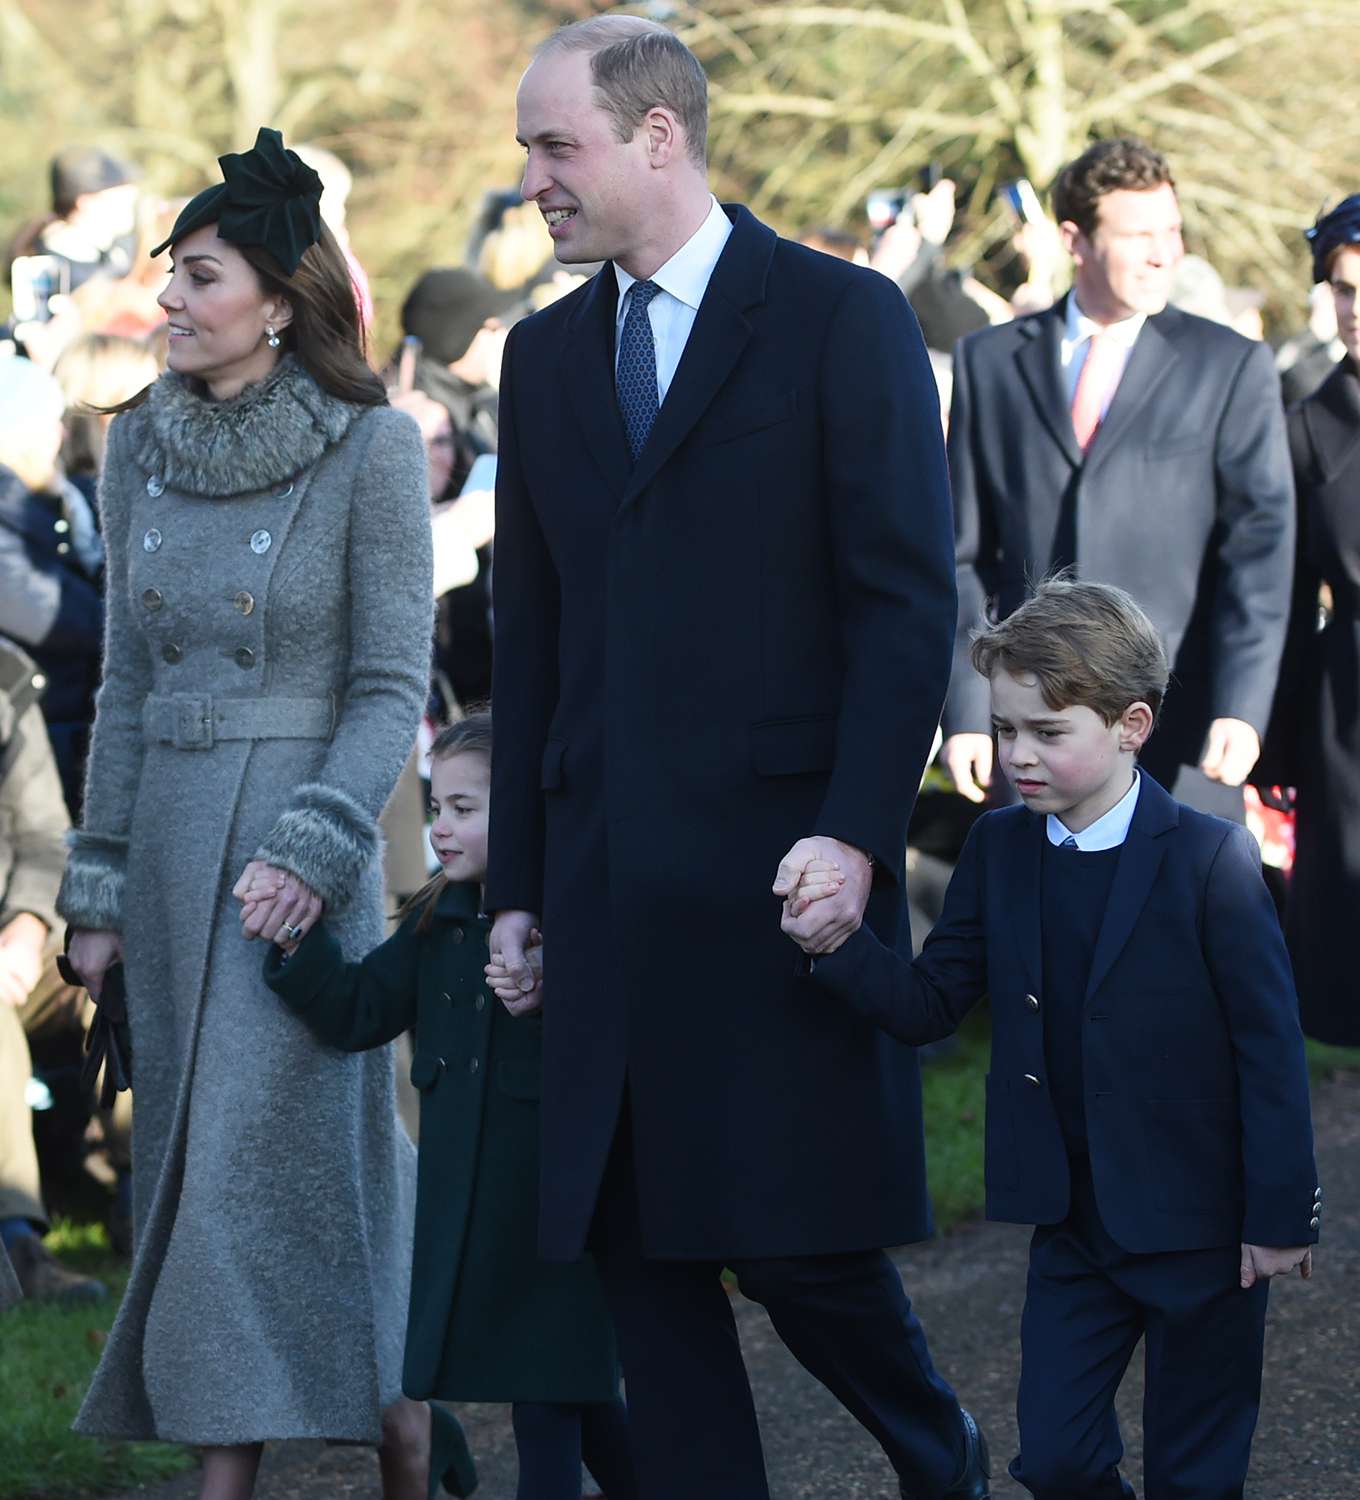 The Duke and Duchess of Cambridge and their children Prince George and Princess Charlotte arriving to attend the Christmas Day morning church service at St Mary Magdalene Church in Sandringham, Norfolk. (Photo by Joe Giddens/PA Images via Getty Images)